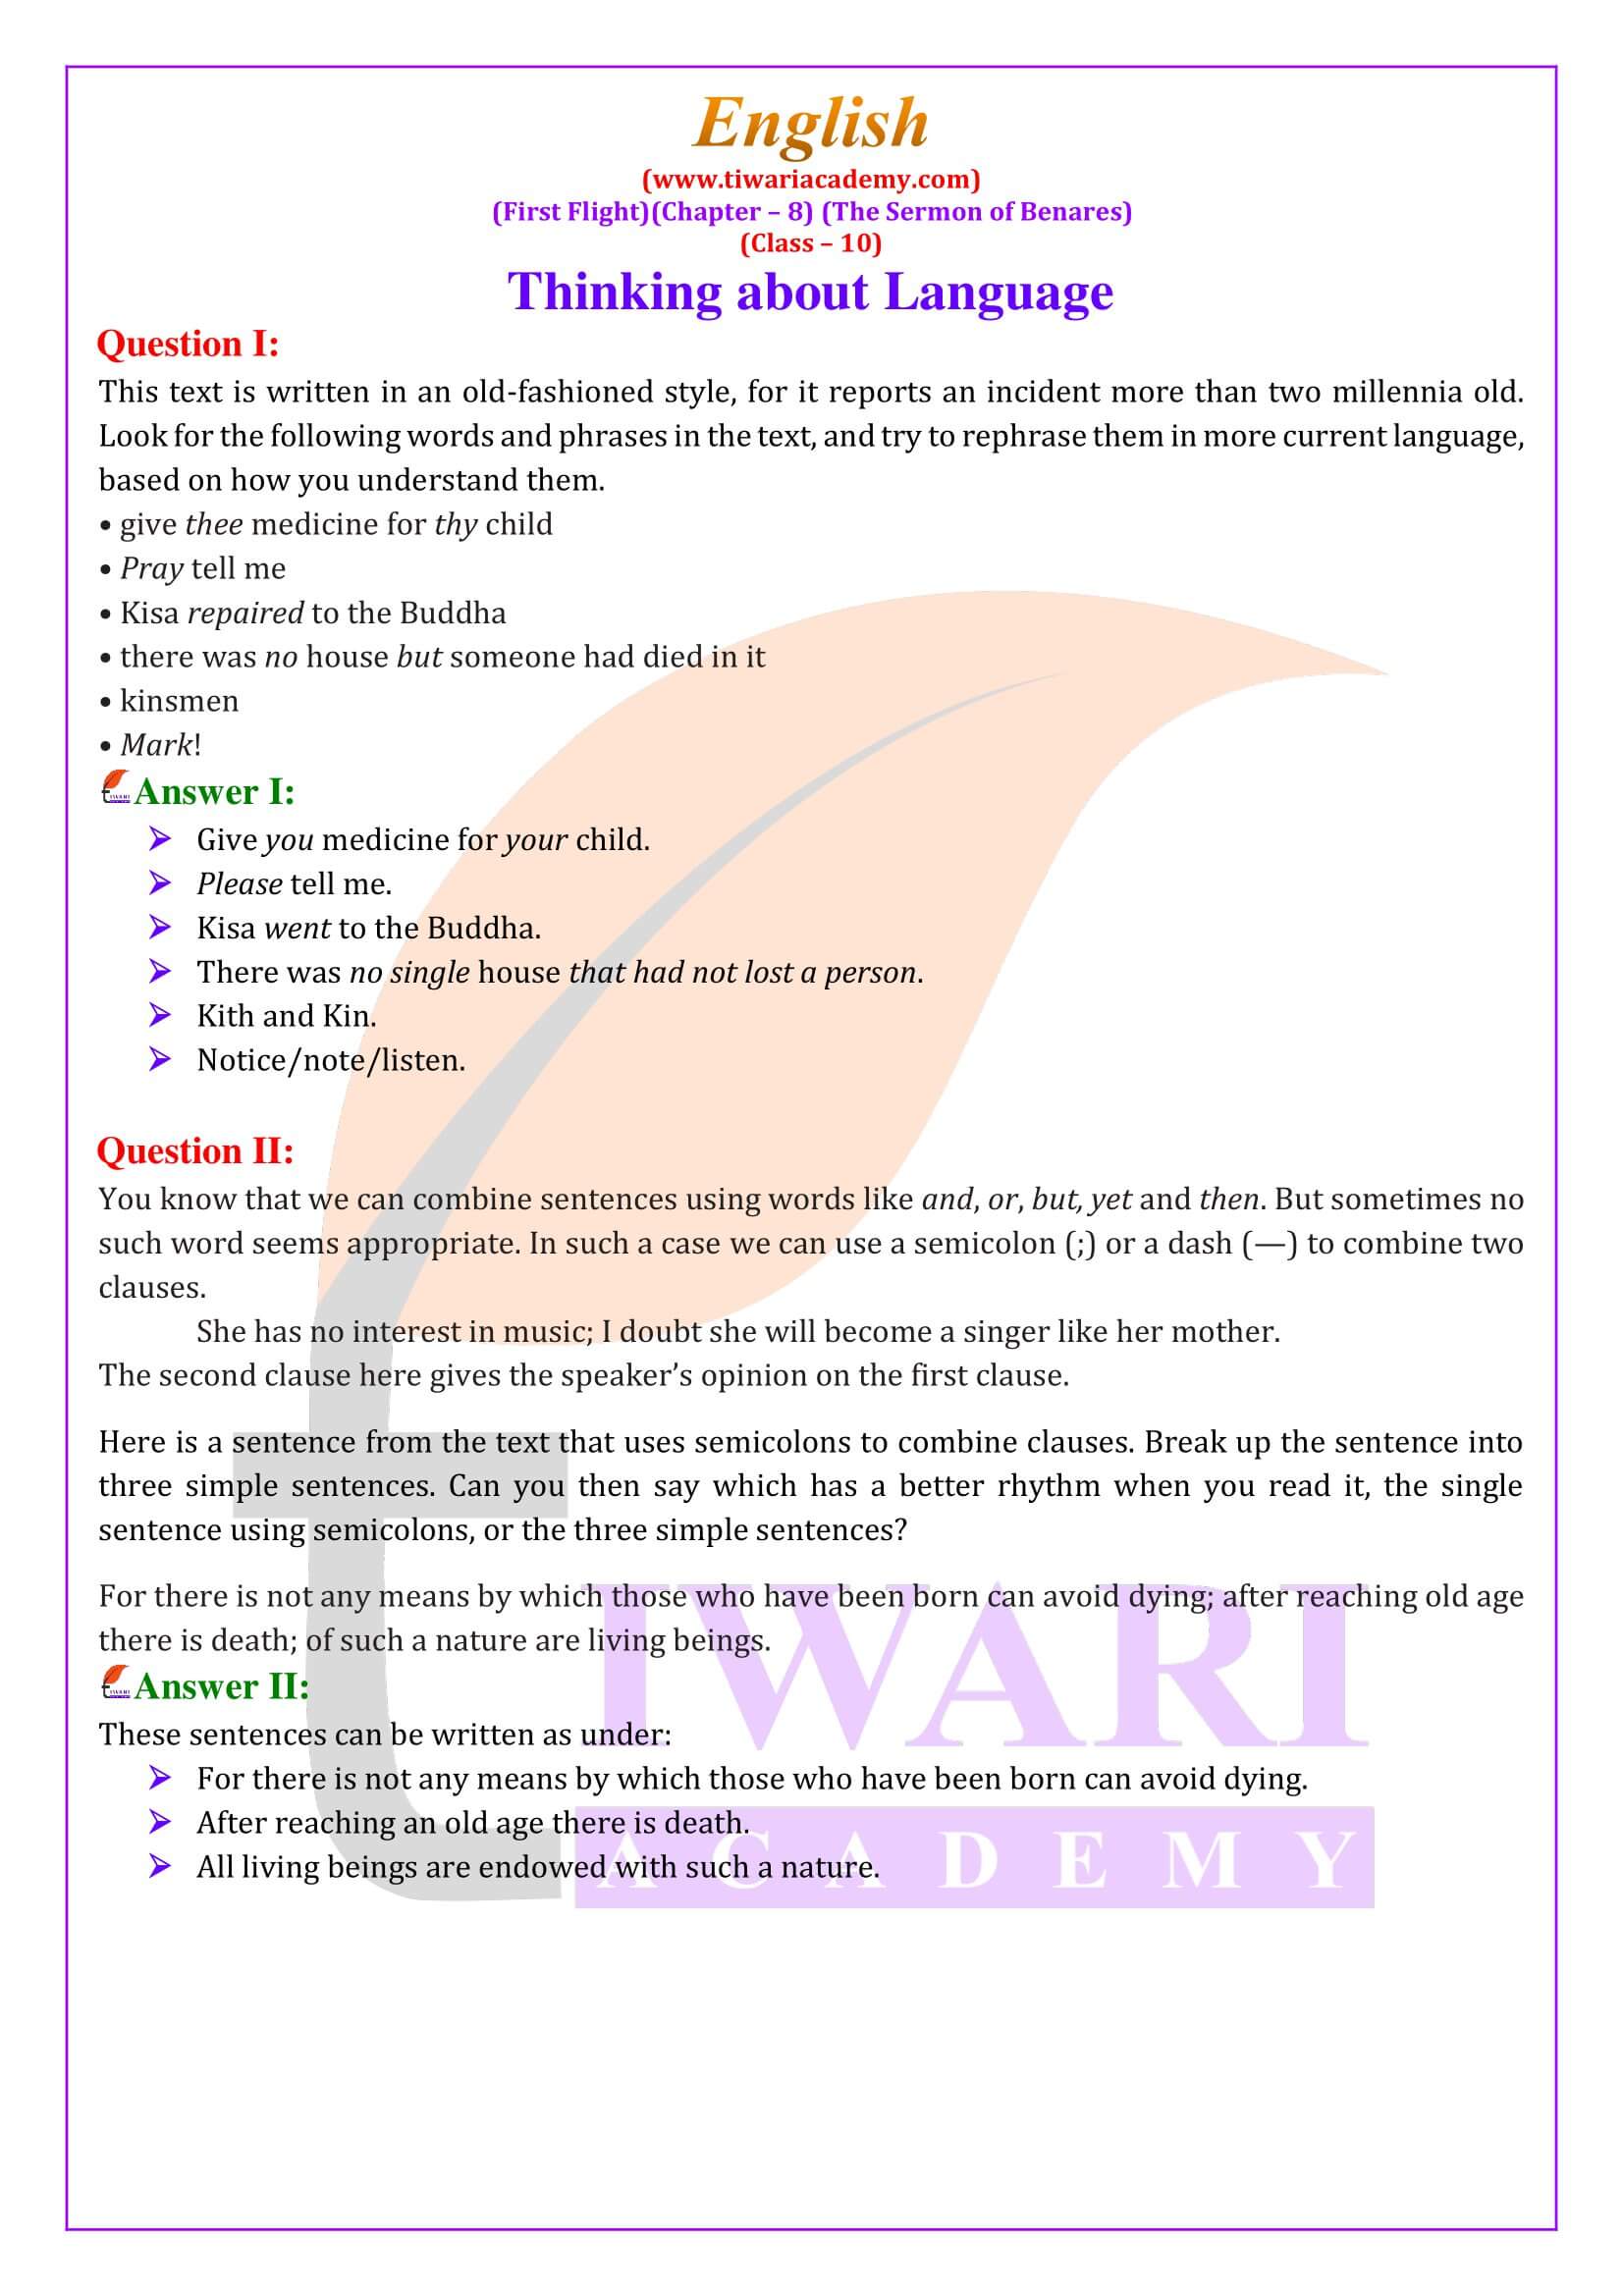 NCERT Solutions for Class 10 English First Flight Chapter 8 The Sermon of Benares answers